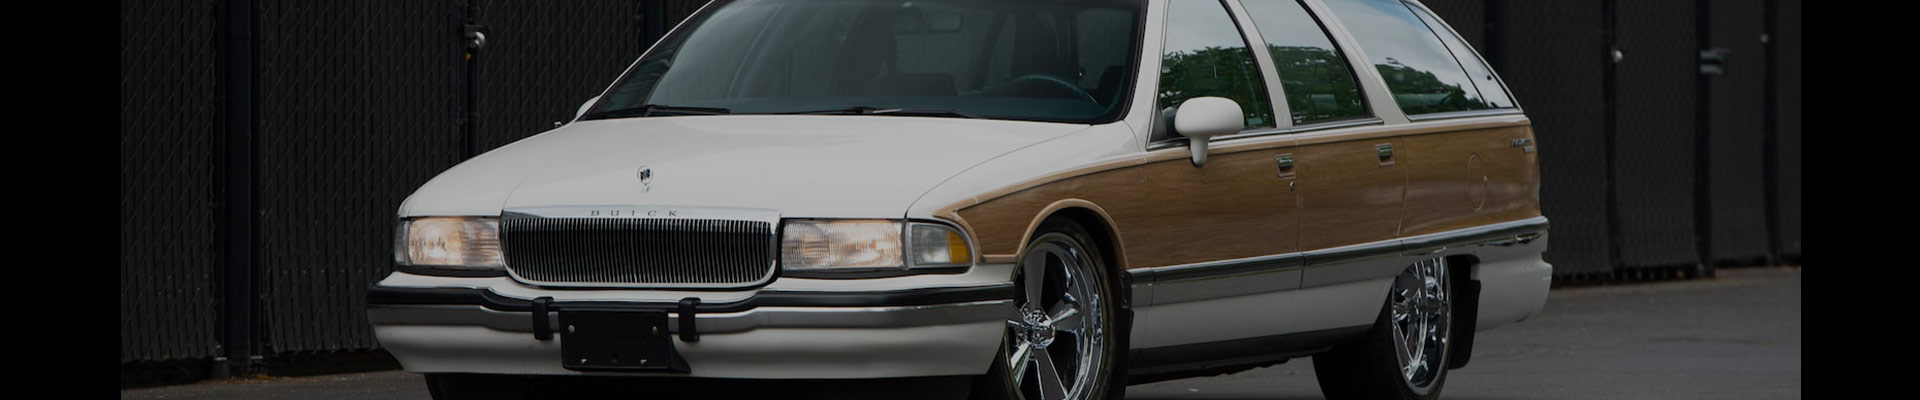 Shop Genuine OE Parts for Buick Roadmaster